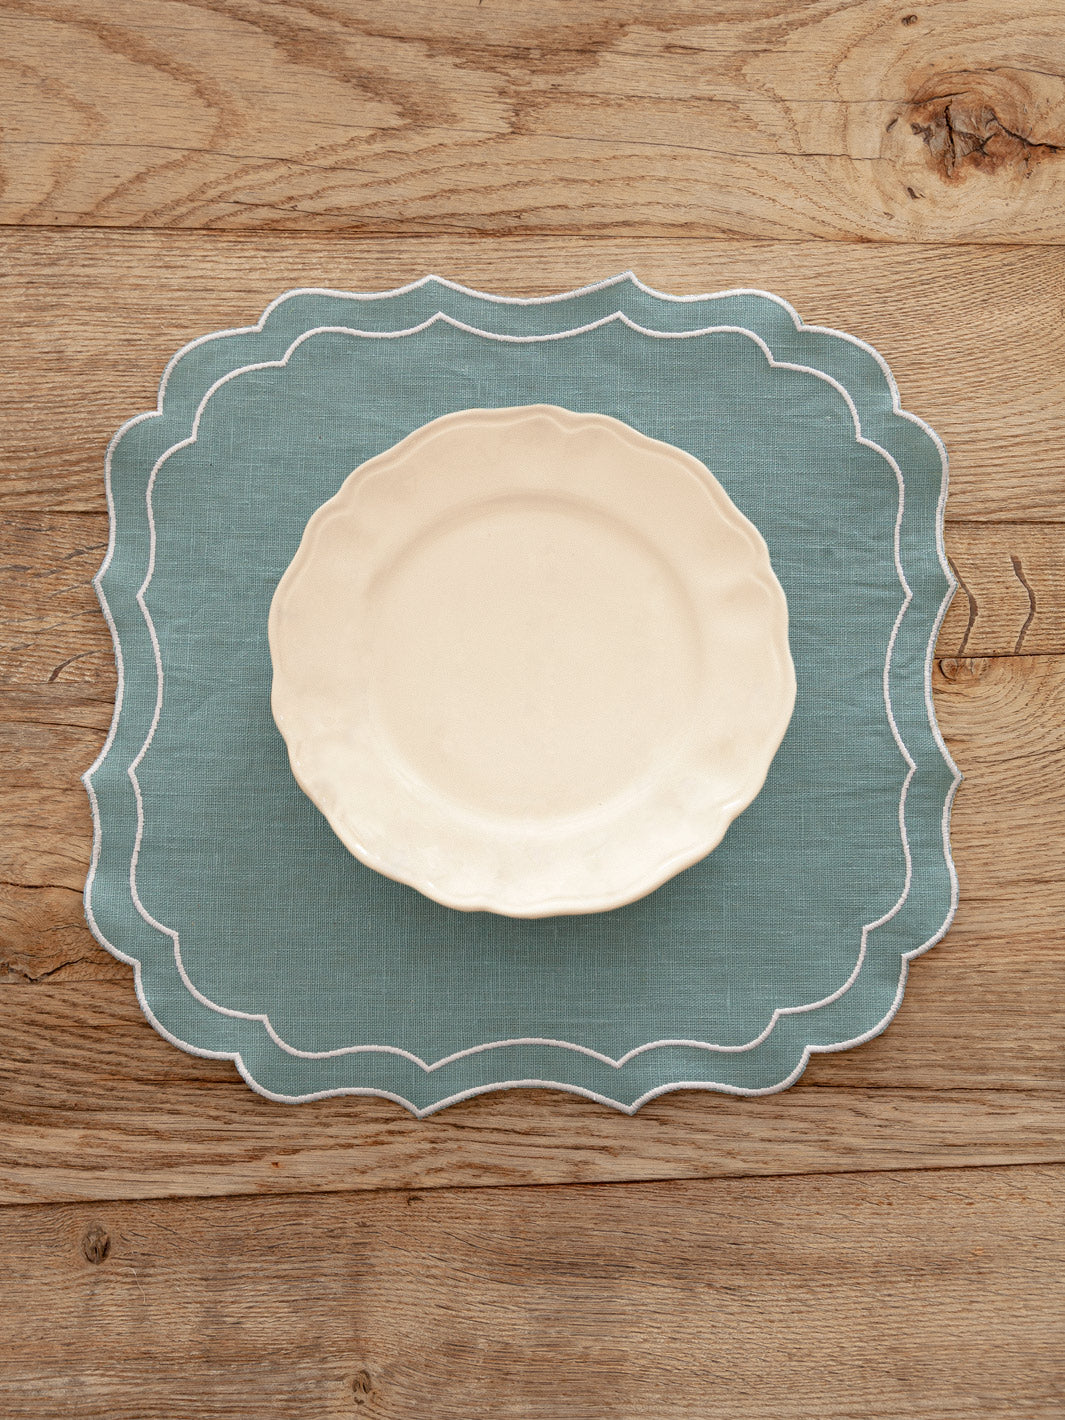 Square Placemat in Solesmes colored waxed linen